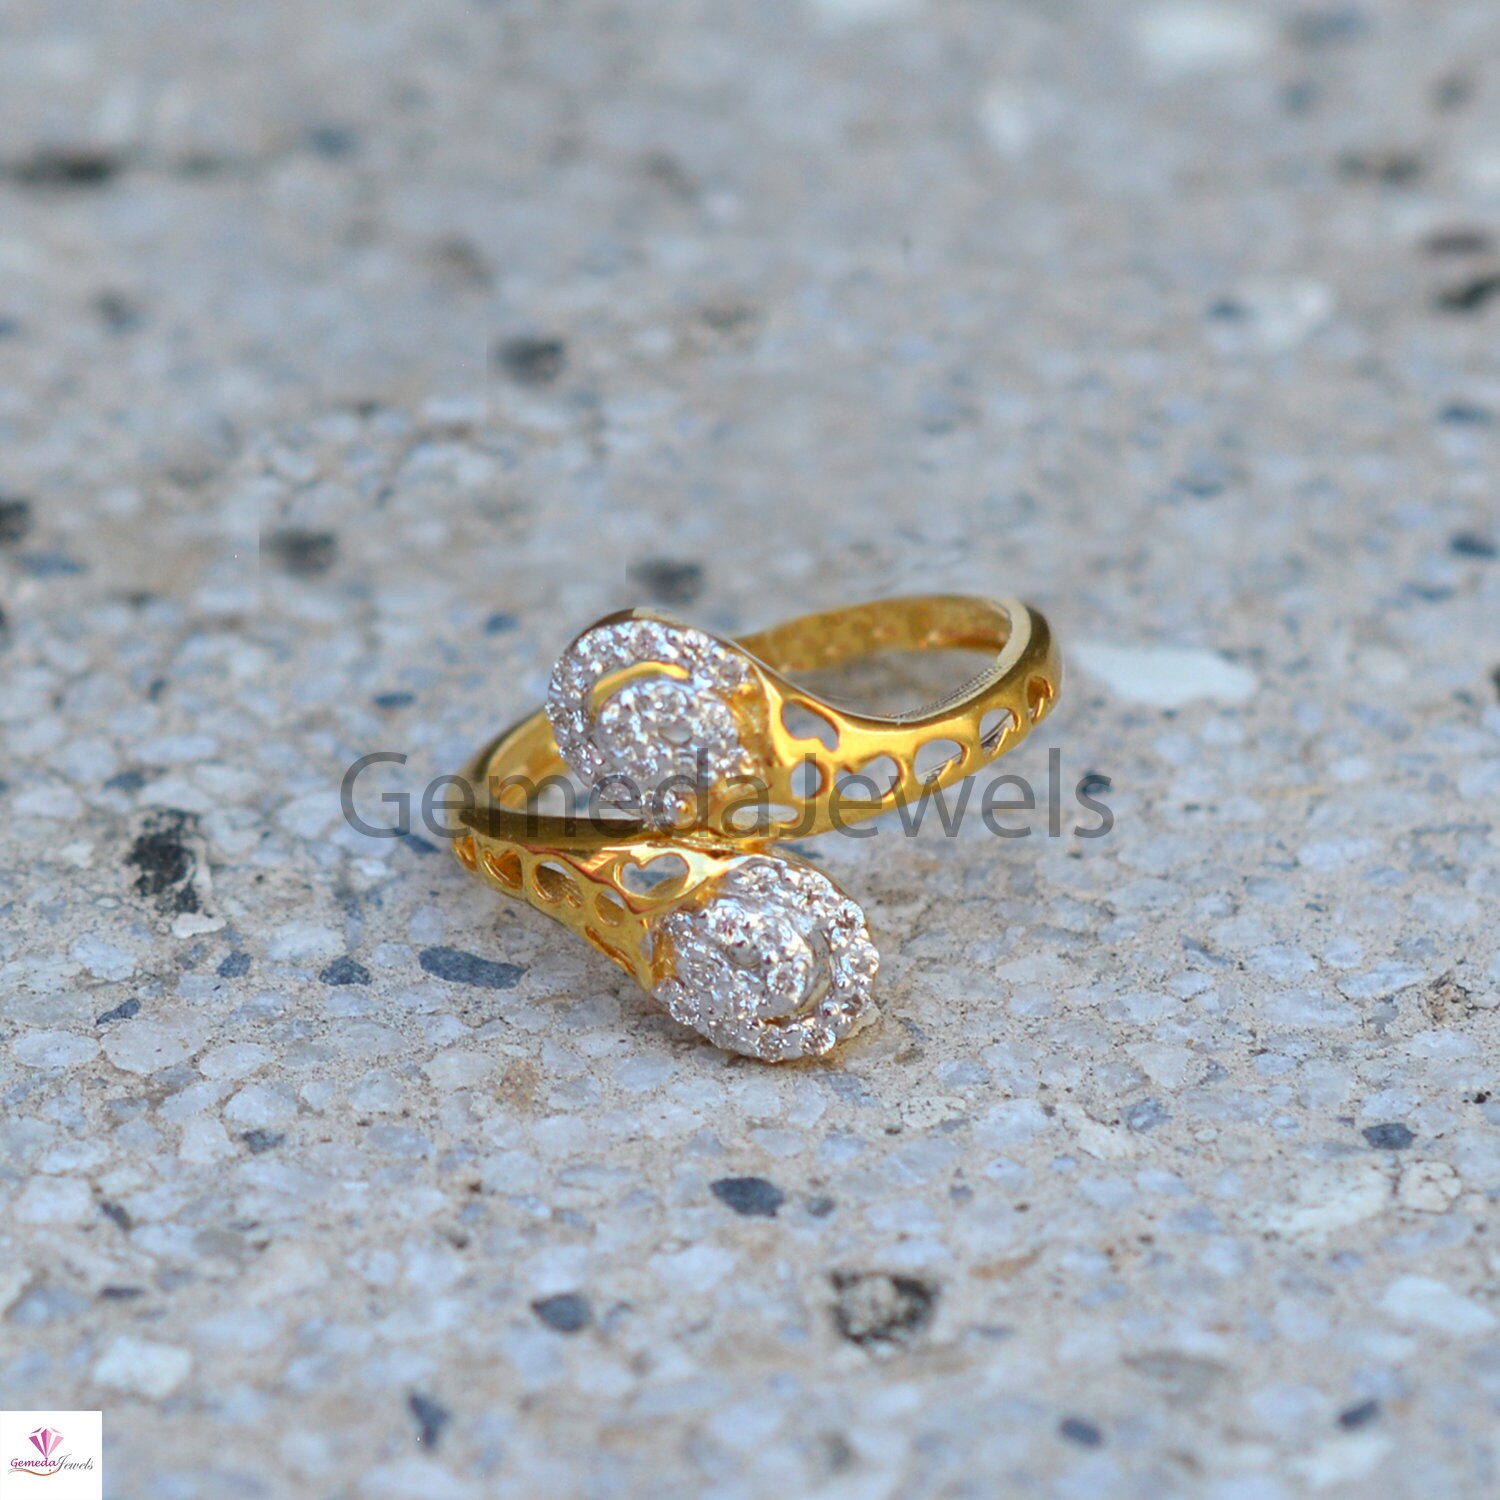 22Kt Gold Fancy Signity Ring - RiLs26658 - US$ 340 - 22Kt Gold Fancy Signity  Ring is beautifully designed with studded high quality cubic zirconia stones